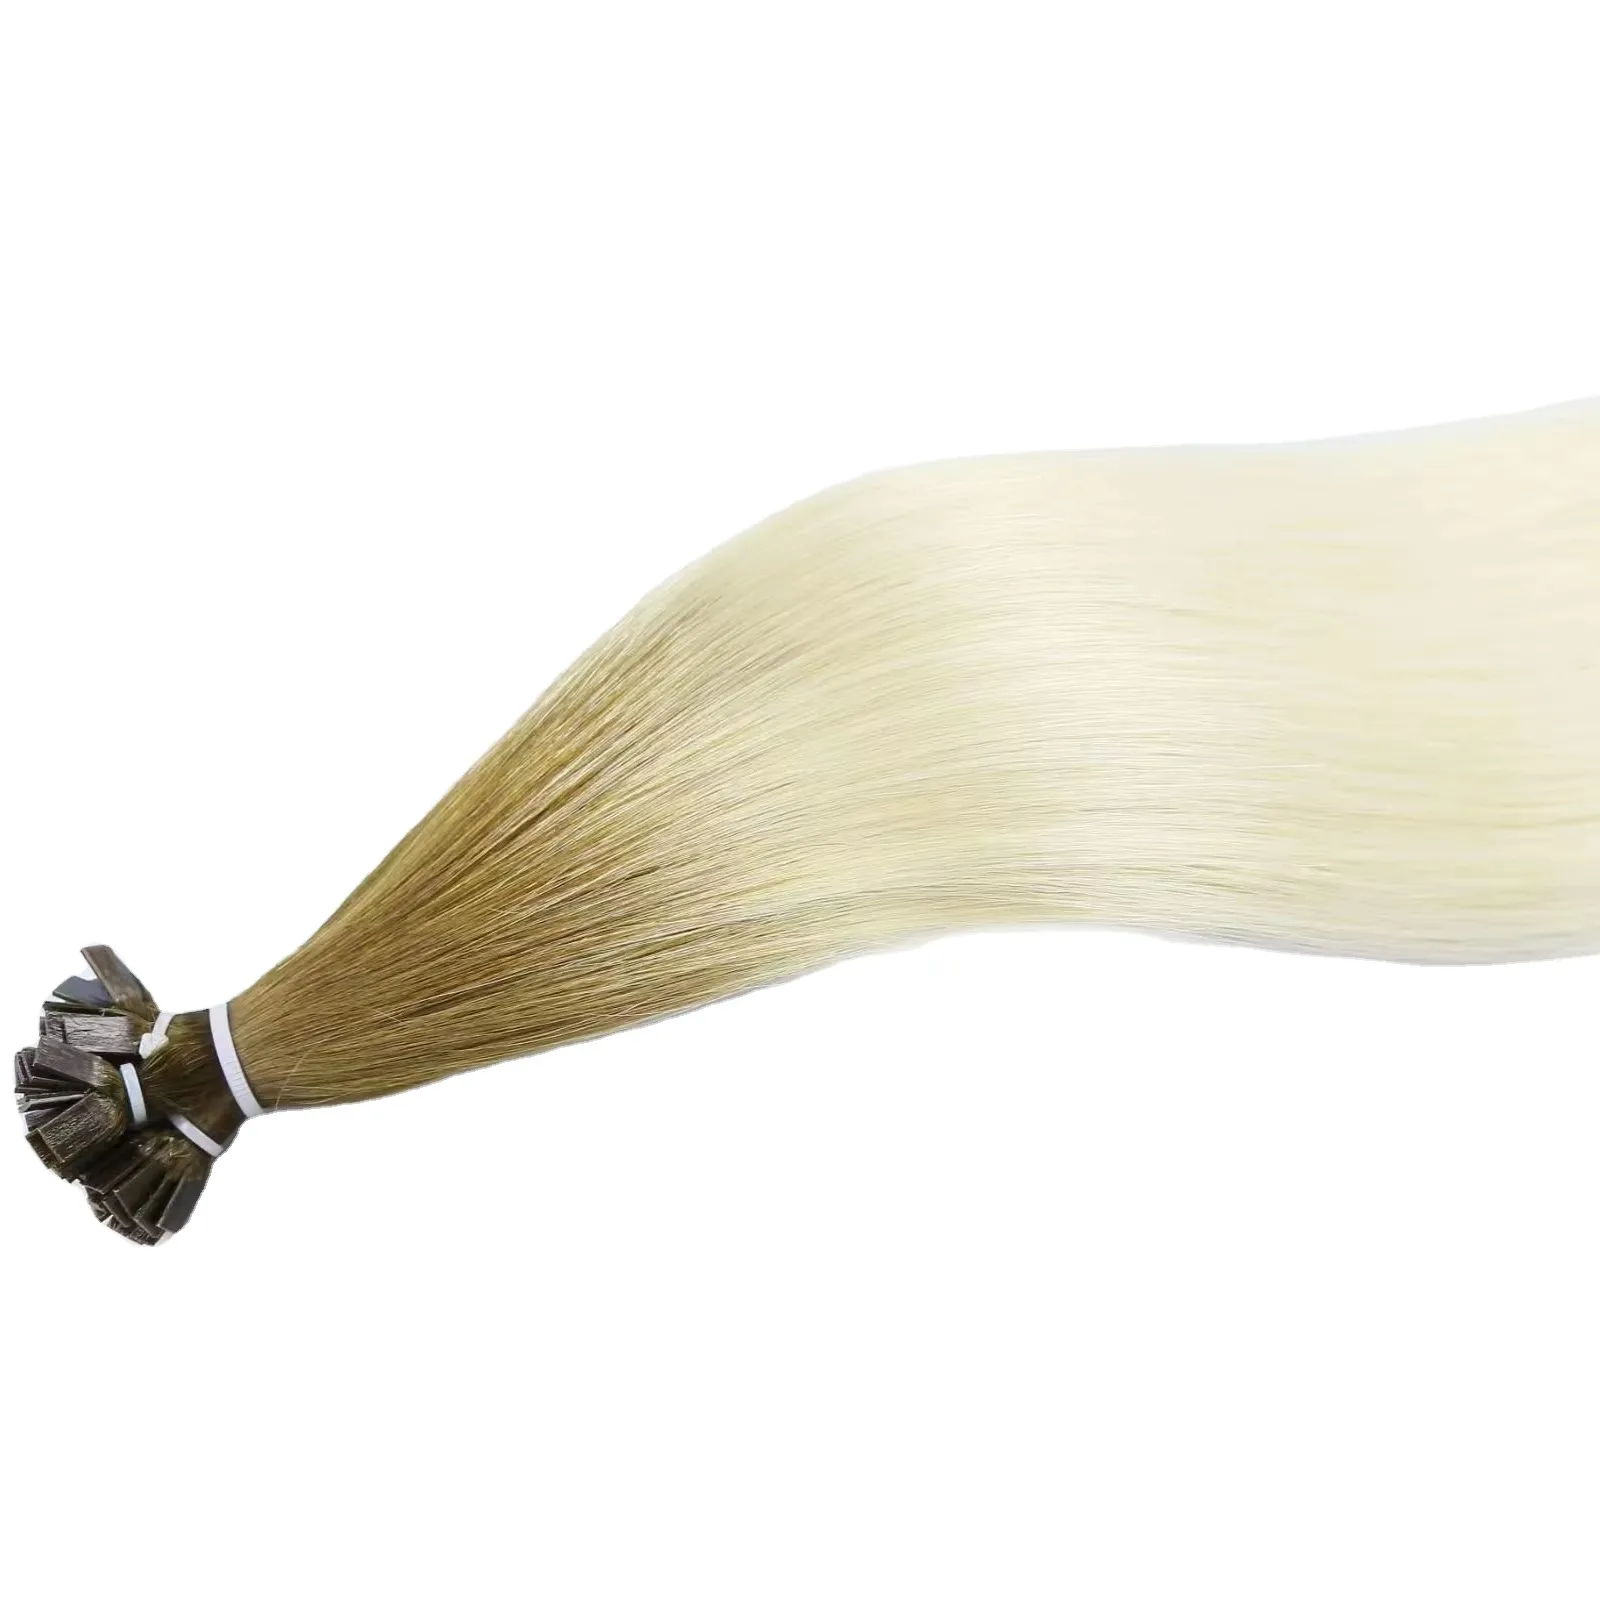 Amara's Hot Sale Brazil Christmas Wigs 100% Real Human Hair Bundles with Wave Style Wholesale Supplier of Ukay Bundles